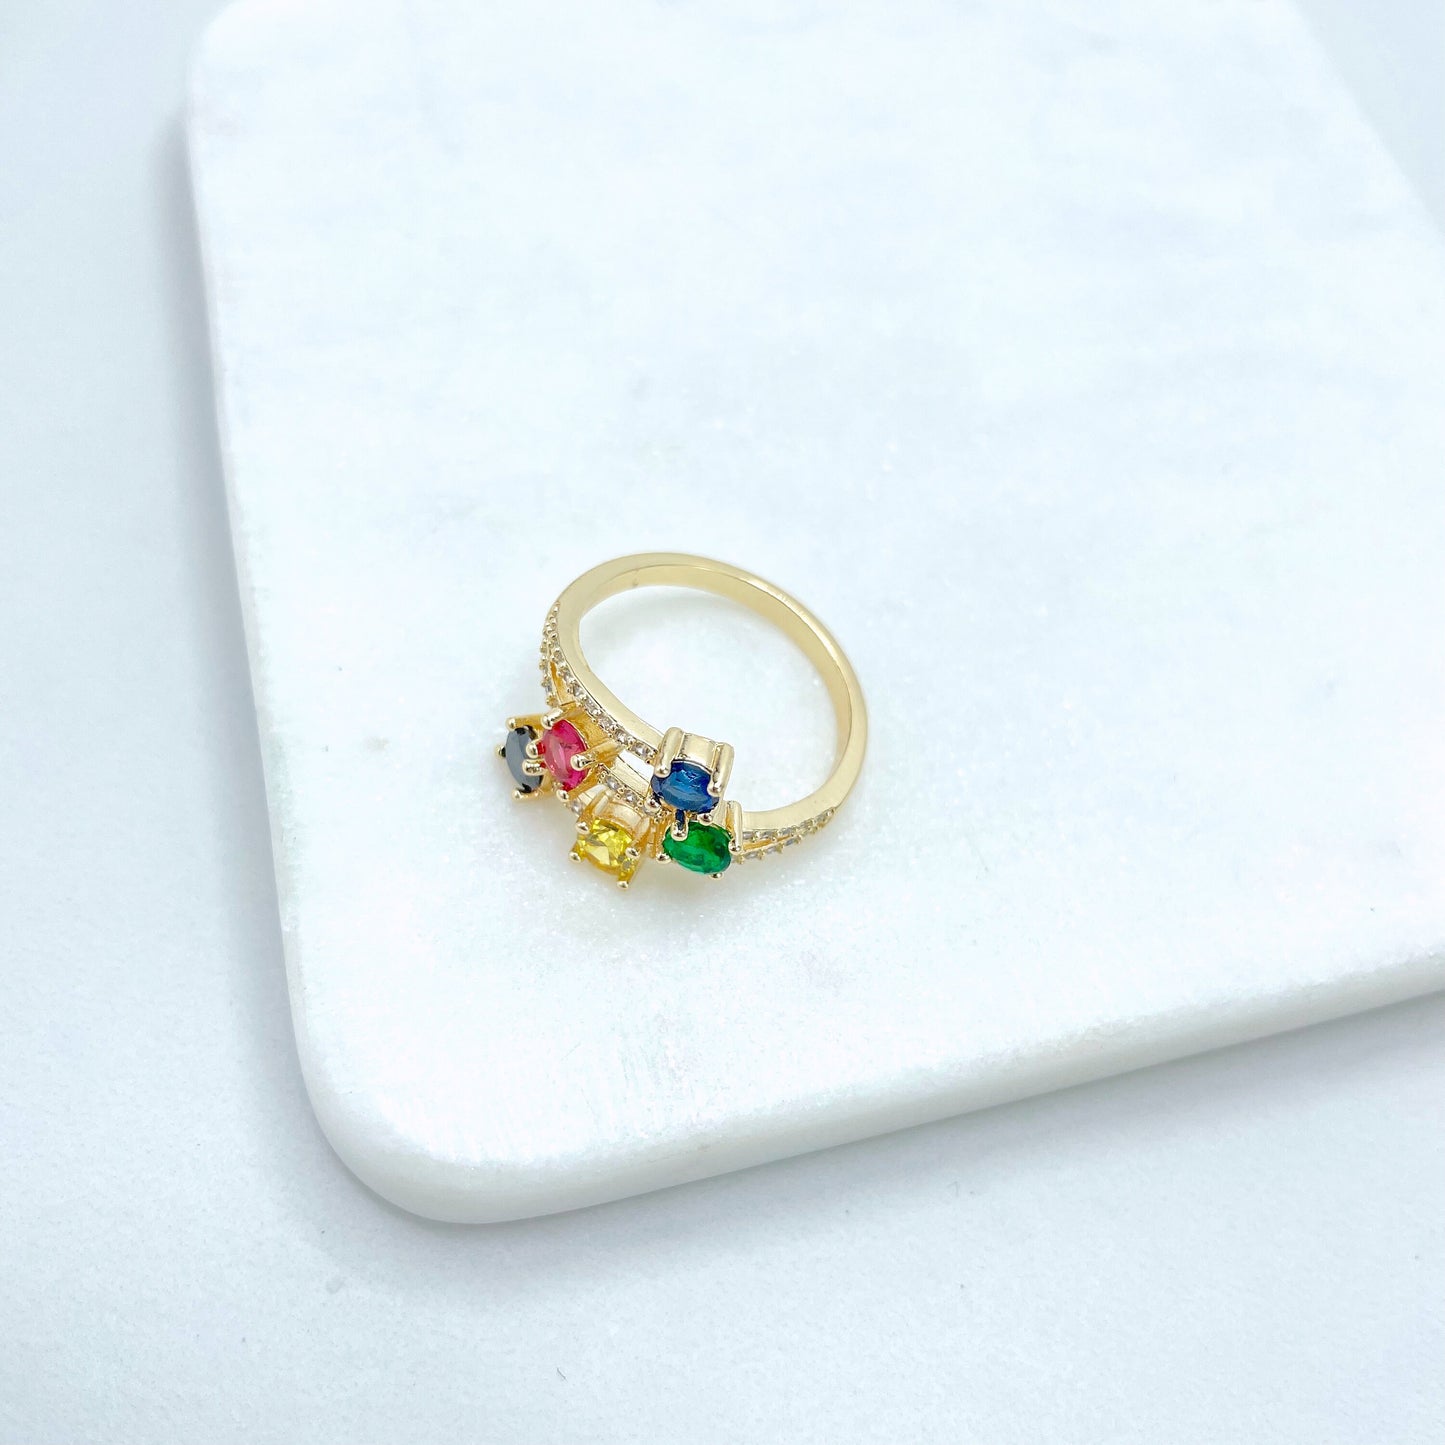 18k Gold Filled Clear Micro Cubic Zirconia and Colored CZ Pink, Blue, Yellow, Green & Black Ring, Wholesale Jewelry Making Supplies